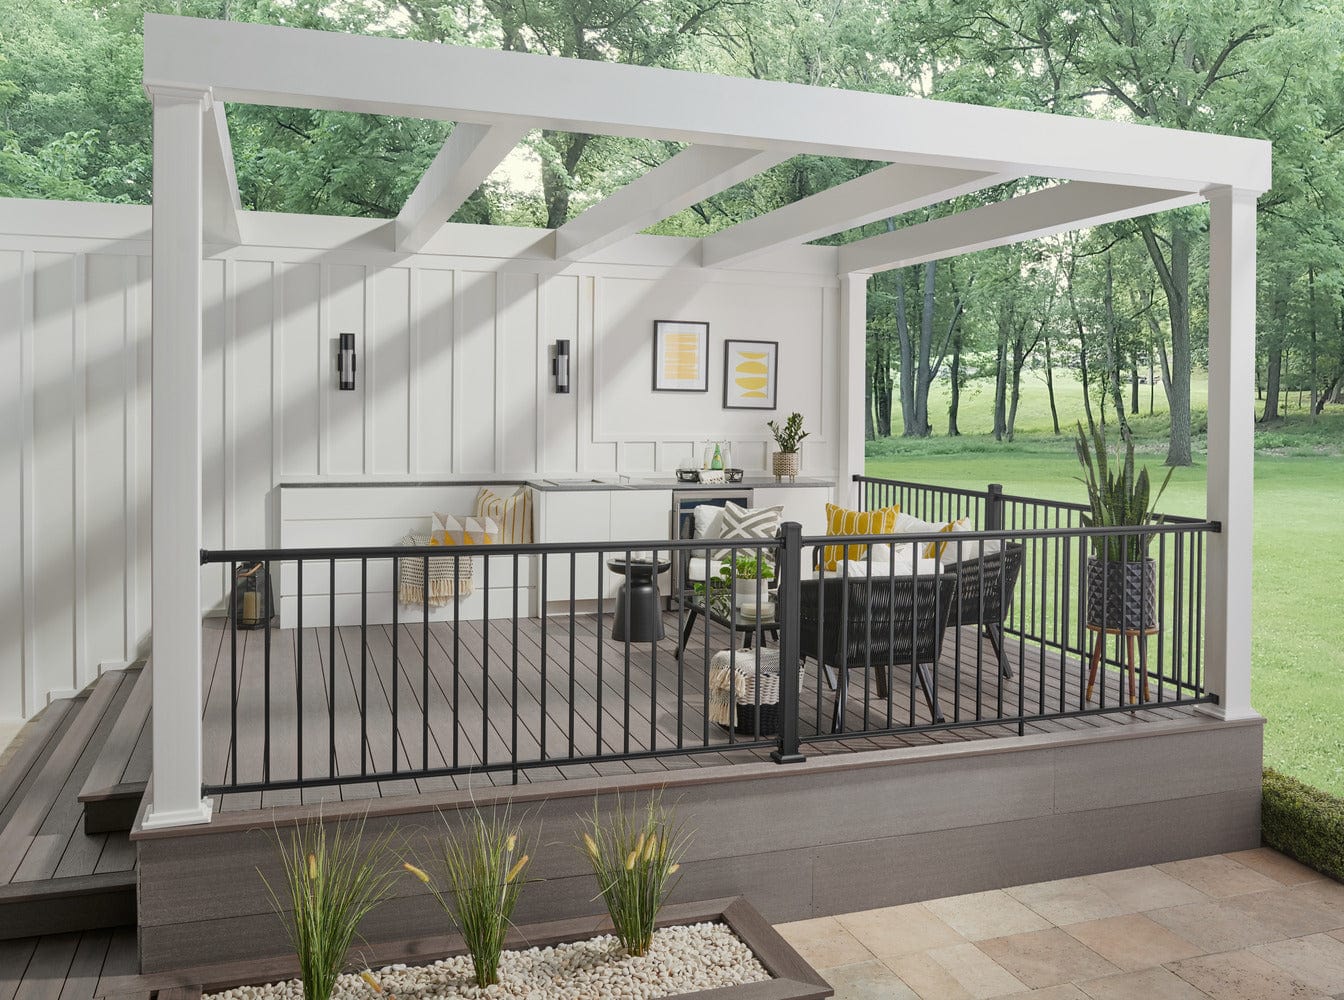 Key-Link Fencing and Railing Outlook Railing 36" Outlook Series Aluminum Deck Railing Kit | Key-Link